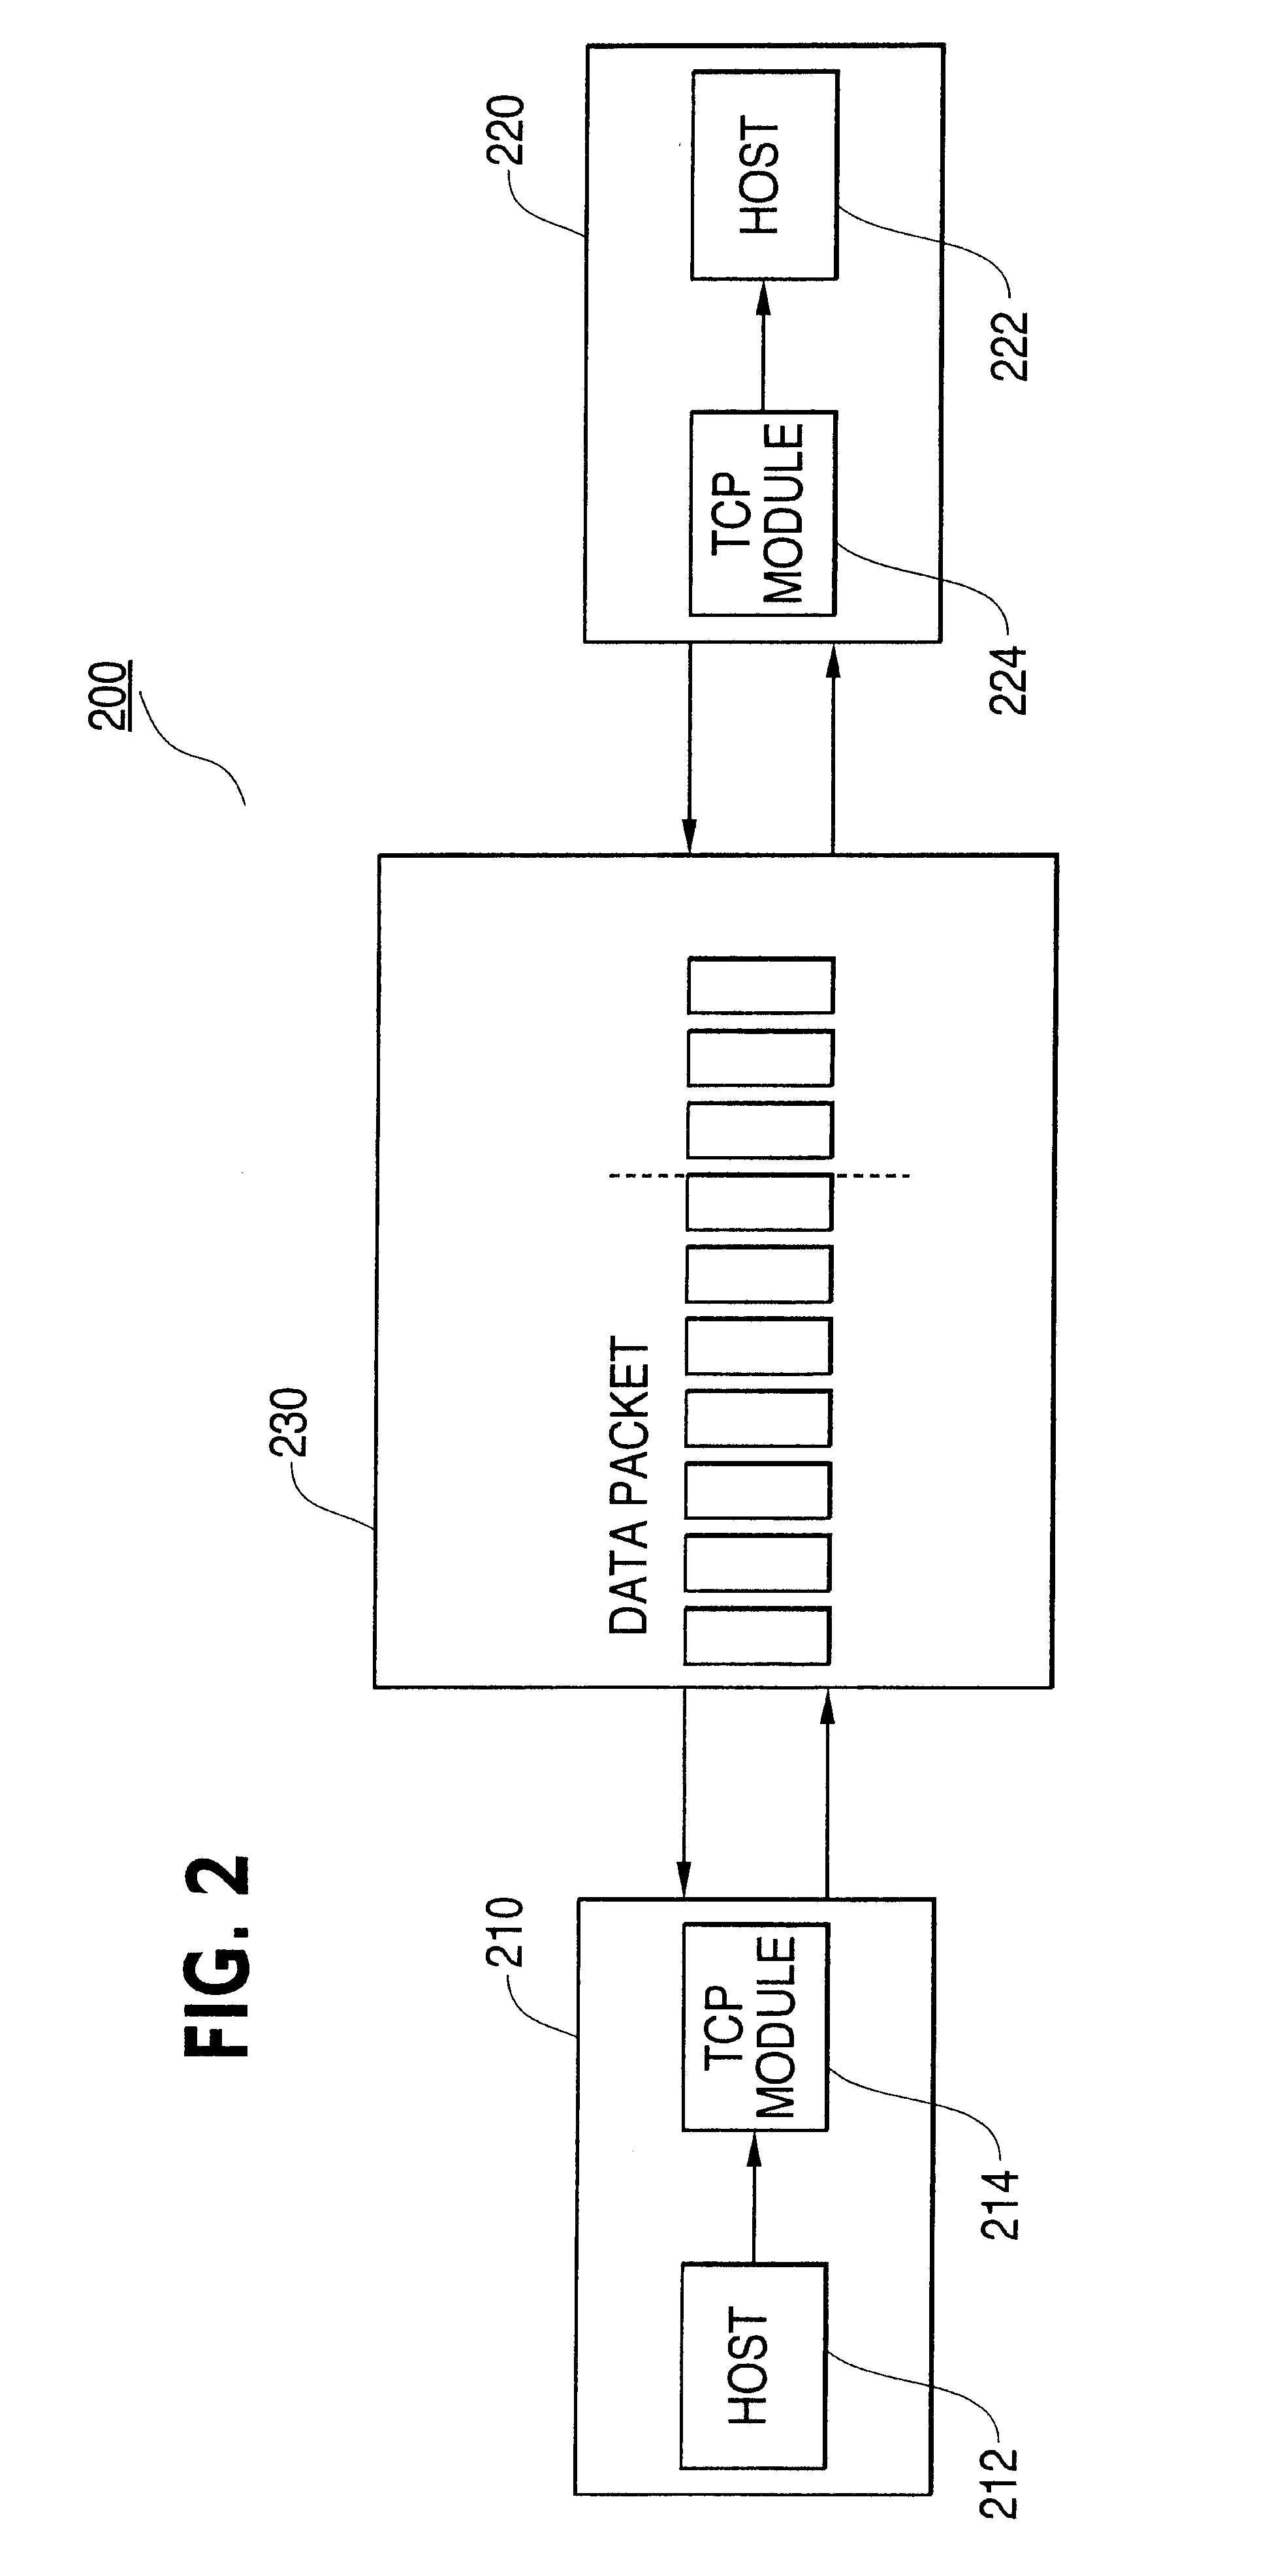 Performance enhancement of transmission control protocol (TCP) for wireless network applications